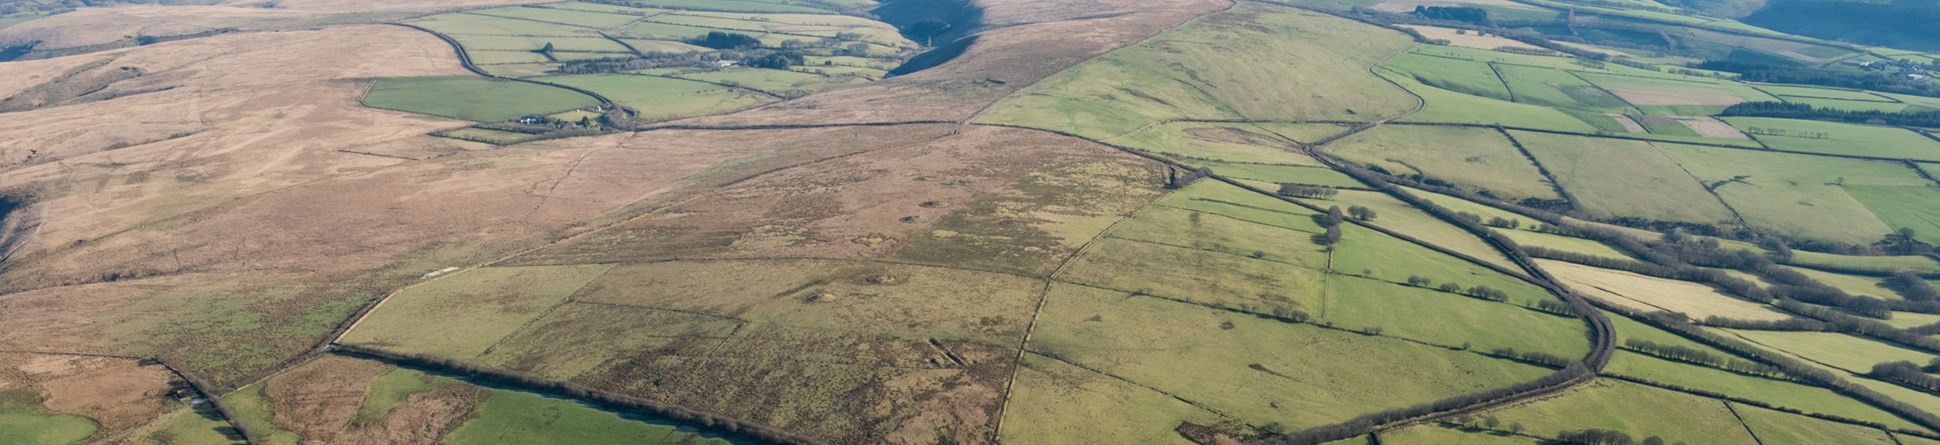 An aerial view of a moorland landscape.